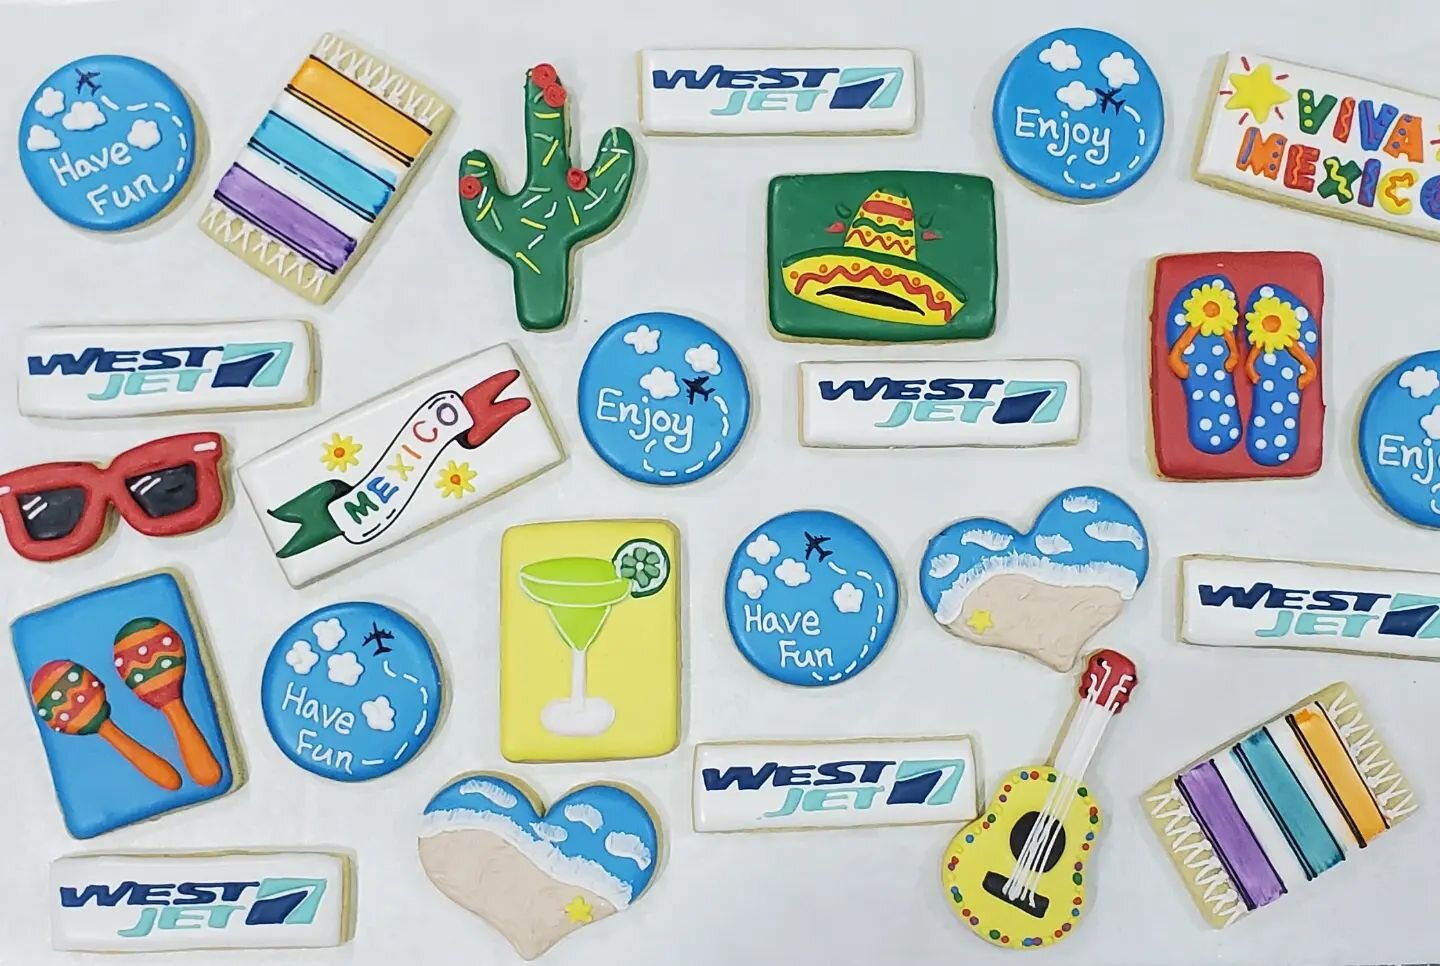 Such a fun set to do! 
Vacation time is a MUST!!!! 

why not celebrate on your way there as well! 

Ole! 

#vacation #vacay #beachvibes #mexico #ole #westjet #beachplease #sunshine #marguerita #tequila #yyccookies #decoratedcookies #airdriemoms #aird